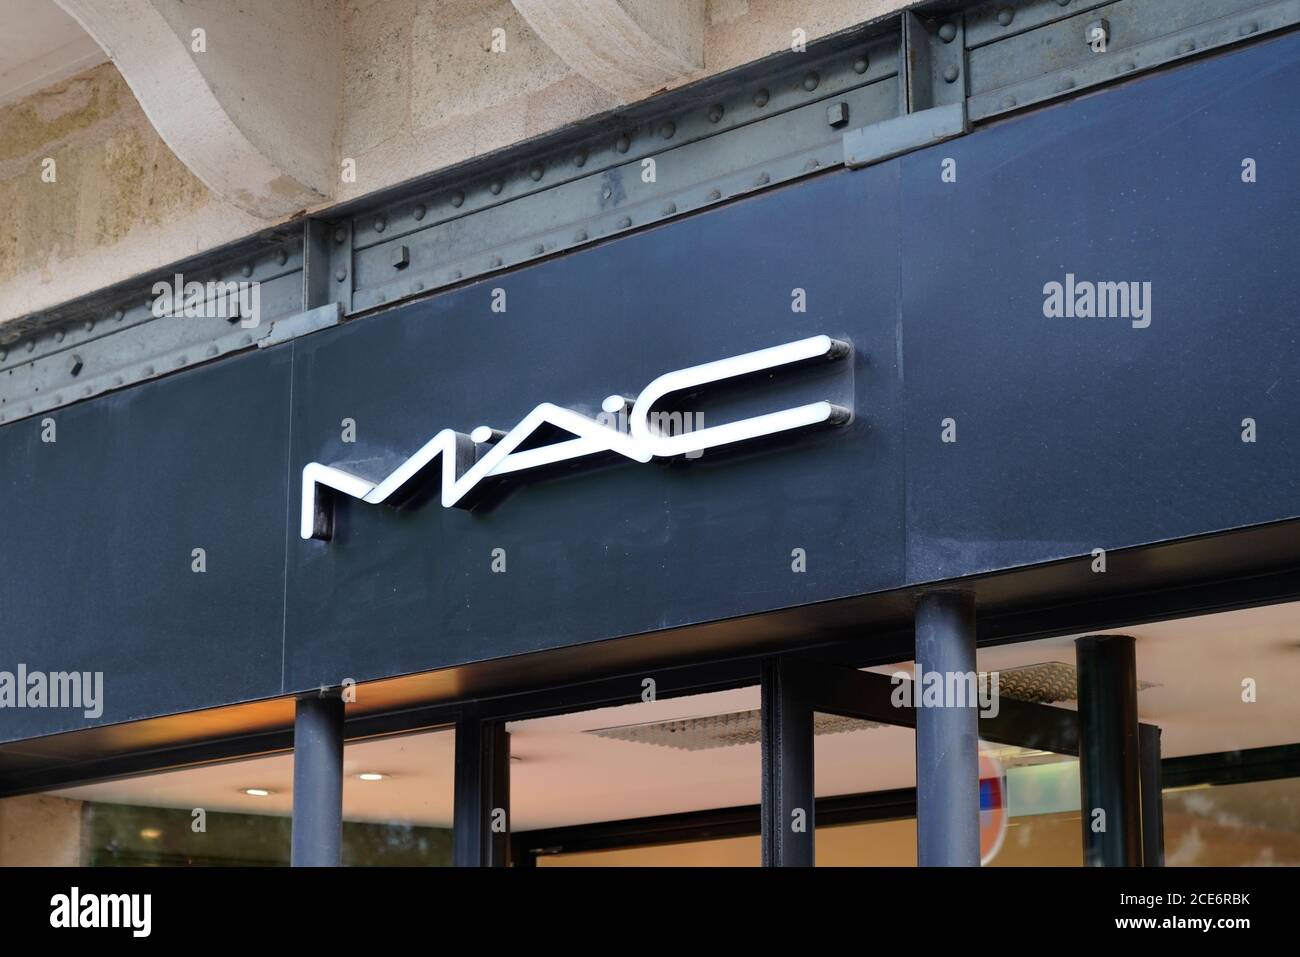 Bordeaux , Aquitaine / France - 08 25 2020 : mac sign text and logo front of beauty shop make-up Art Cosmetics manufacturer from us Stock Photo